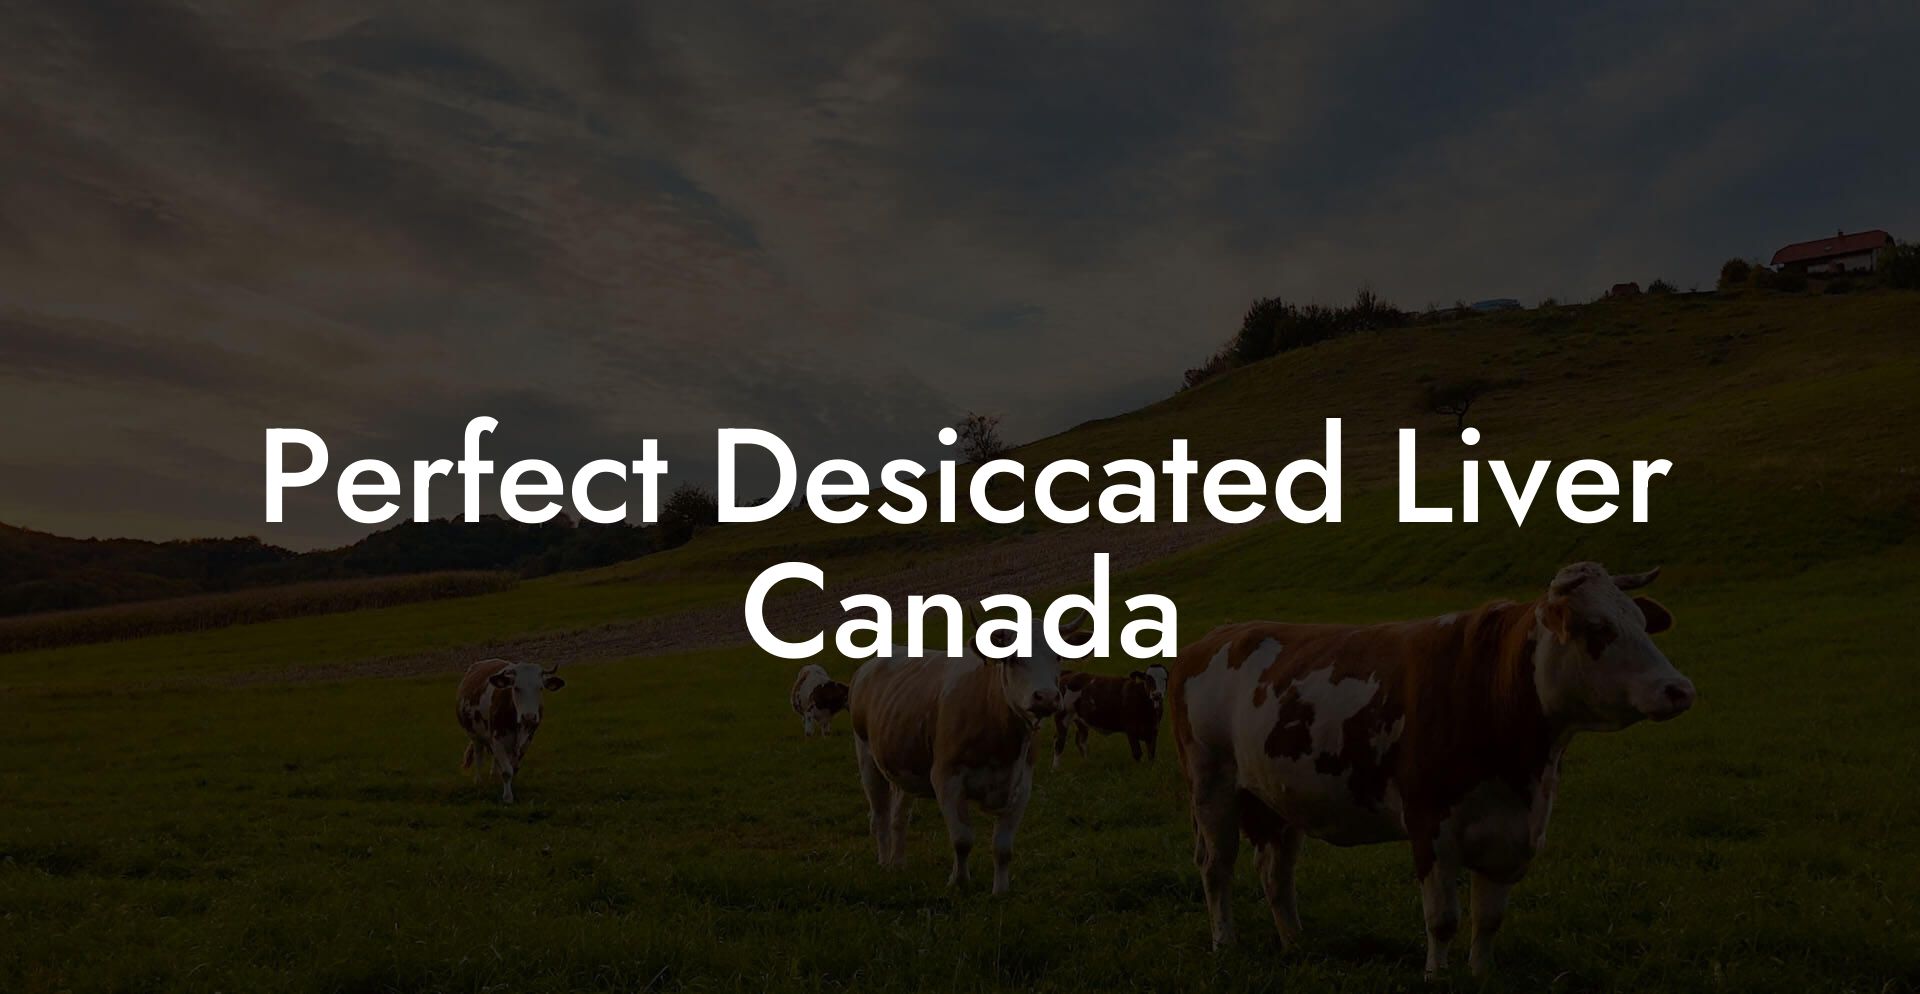 Perfect Desiccated Liver Canada